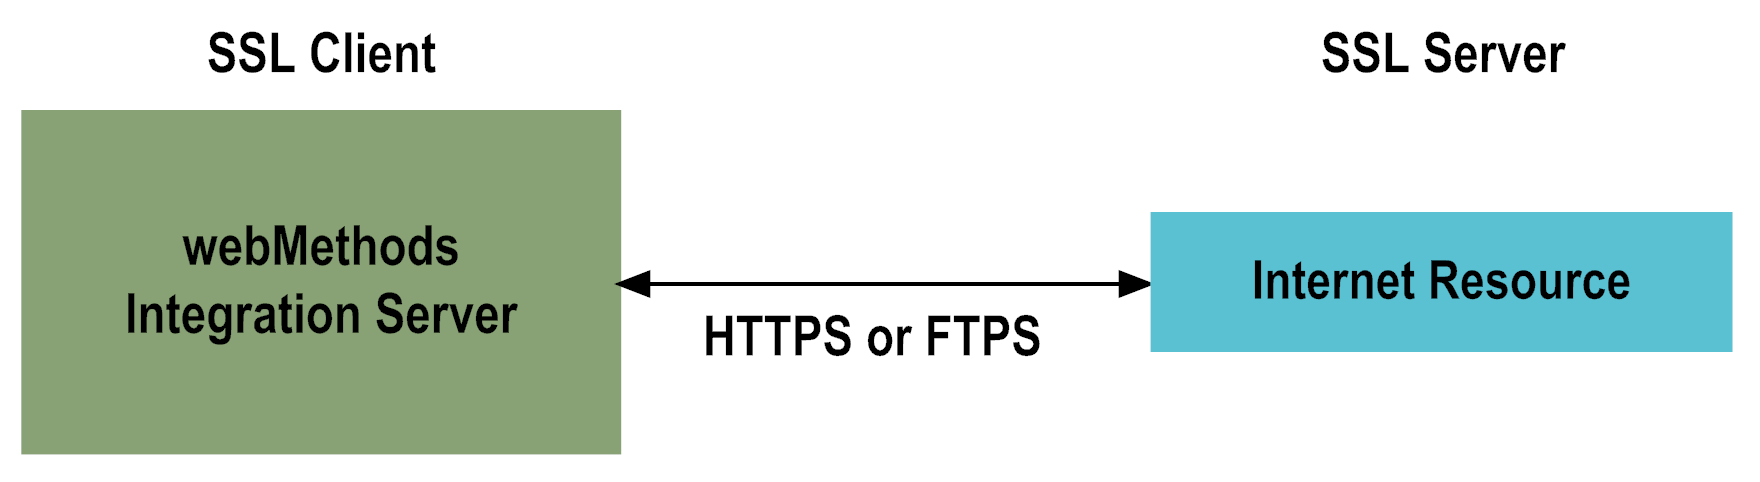 The following figure shows Integration Server acting as an SSL client